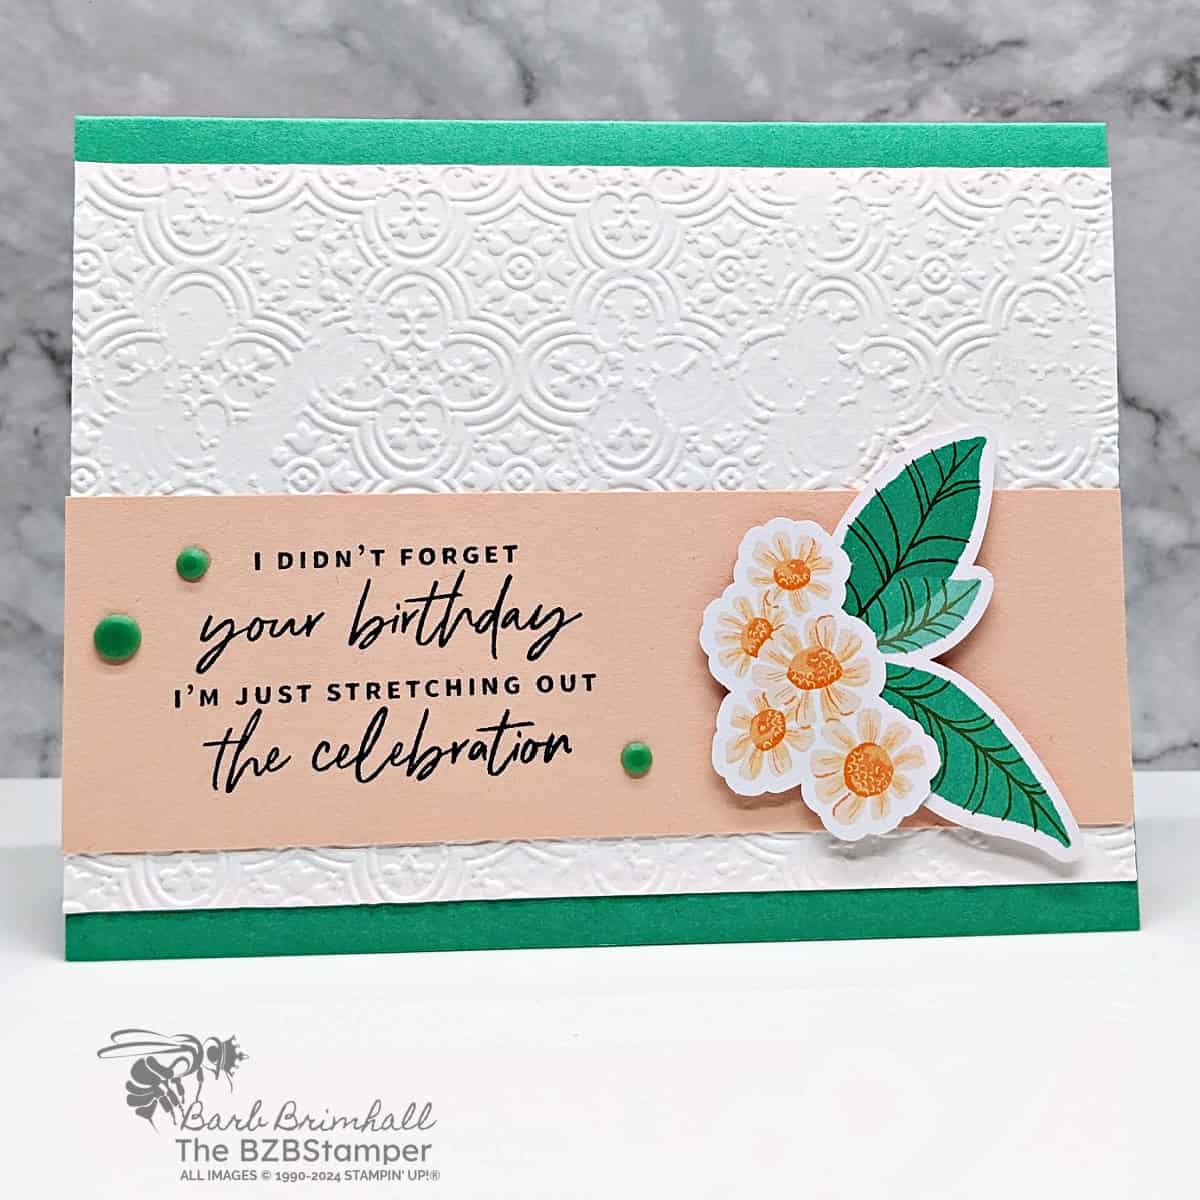 Belated Birthday Card Using The Something Fancy Stamps in greens and pinks with a floral image and dry embossed background.